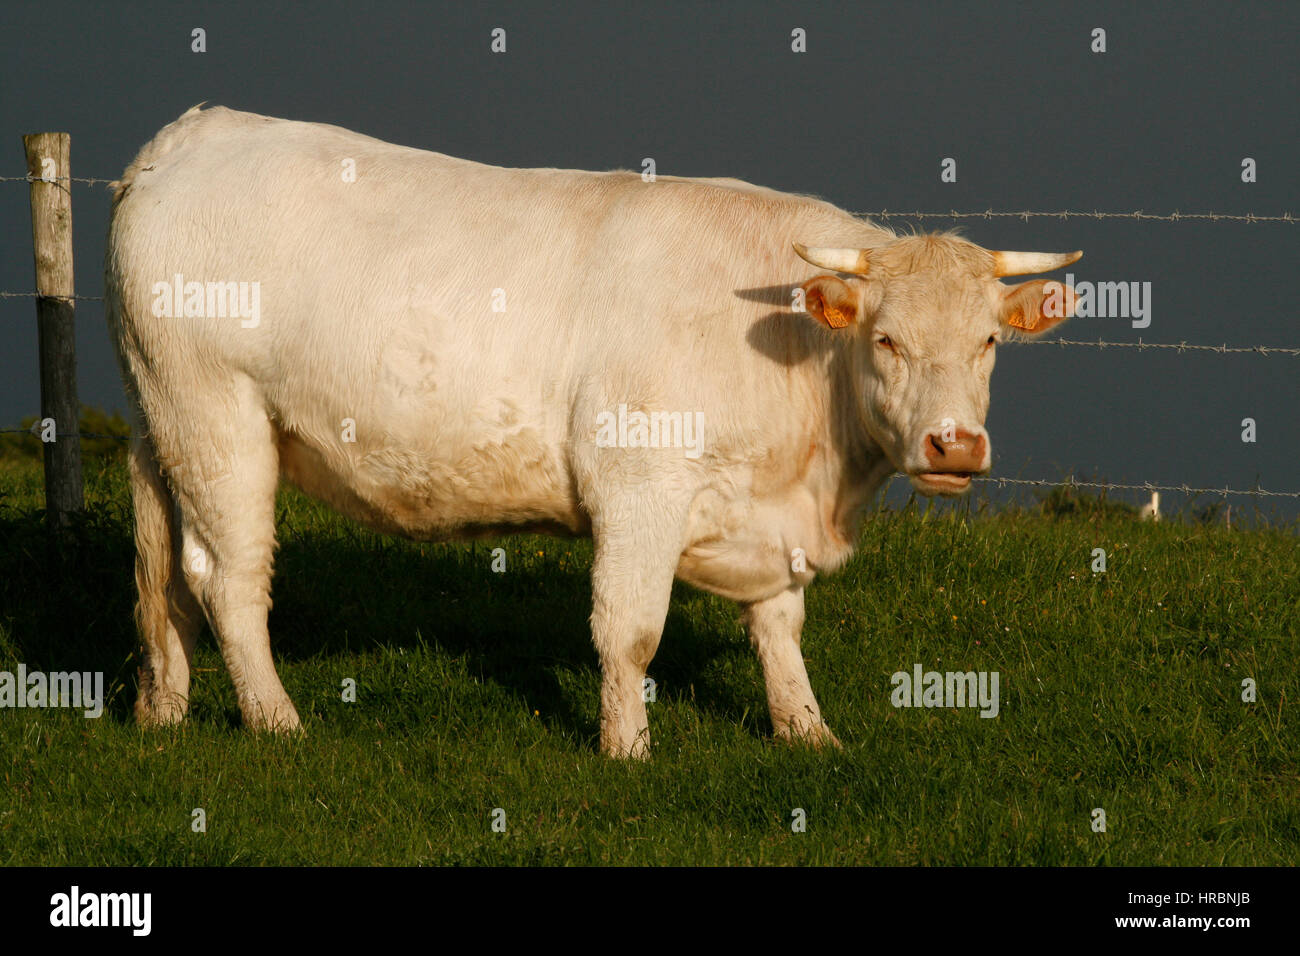 cattle for meat production Stock Photo